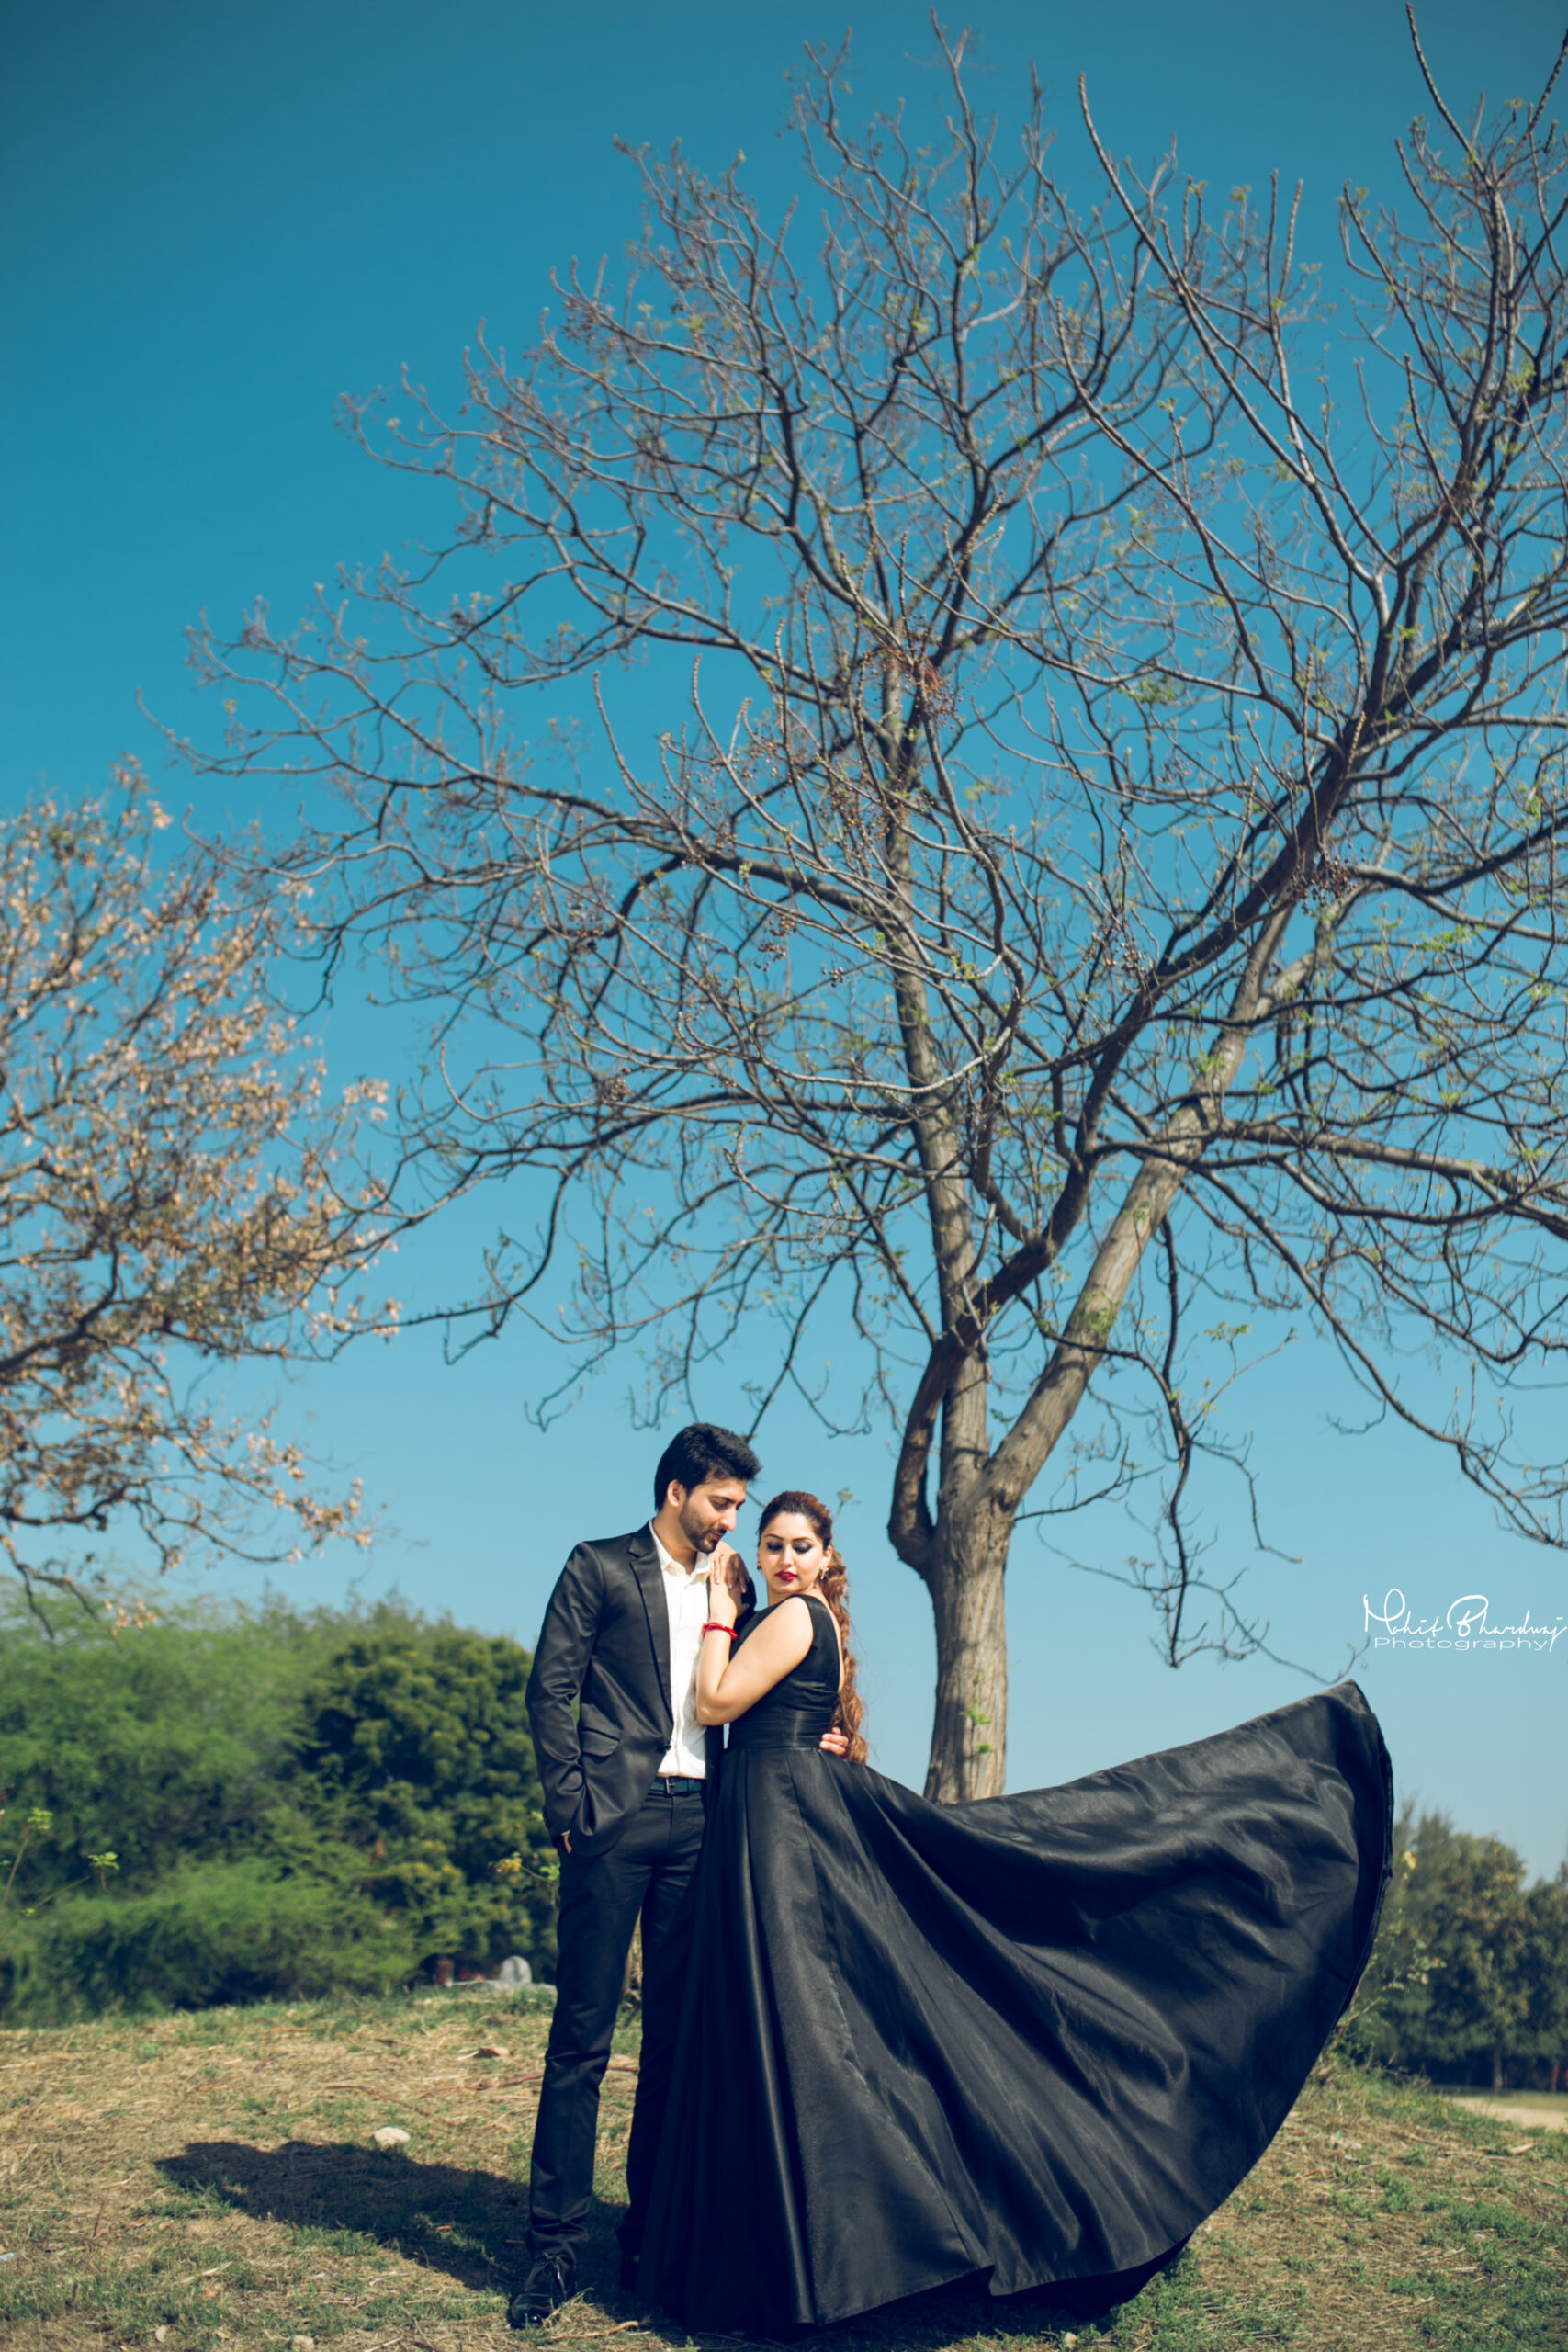 Wedding Photographer in India | Get a quote for Wedding shoots